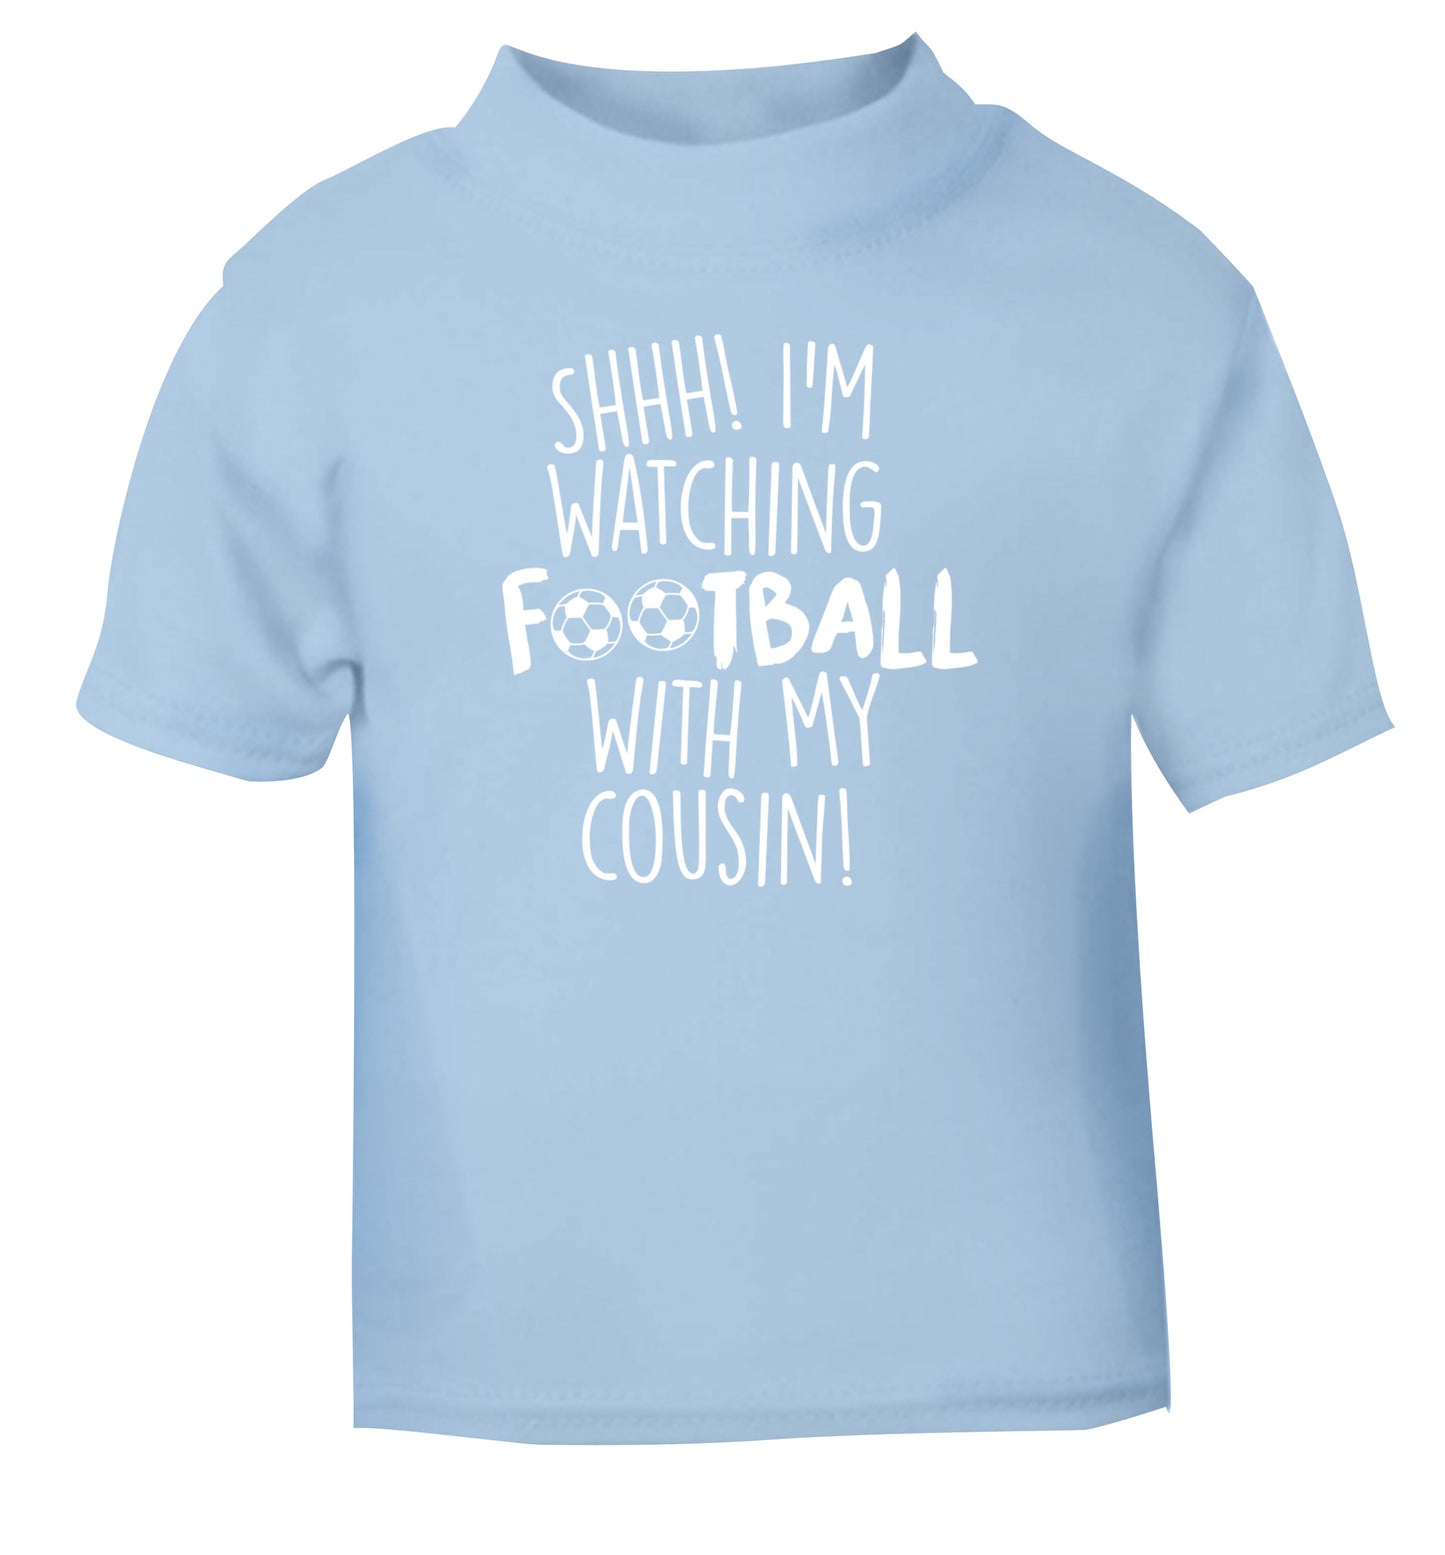 Shhh I'm watching football with my cousin light blue Baby Toddler Tshirt 2 Years